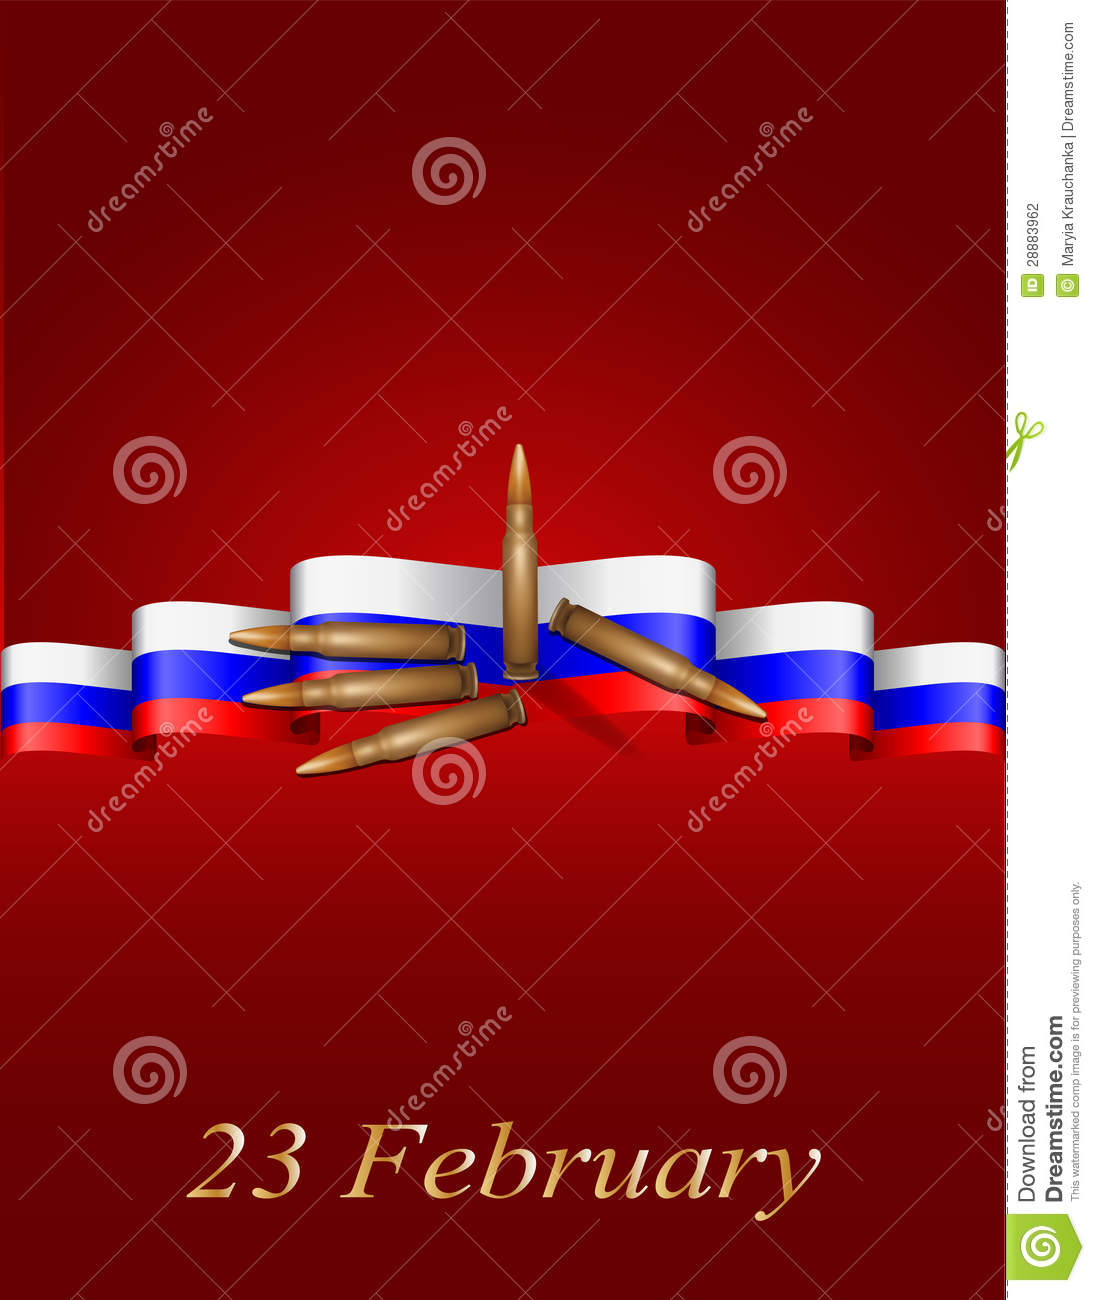 Greeting Card With Russian Flag Related To Victory Day Or 23 February